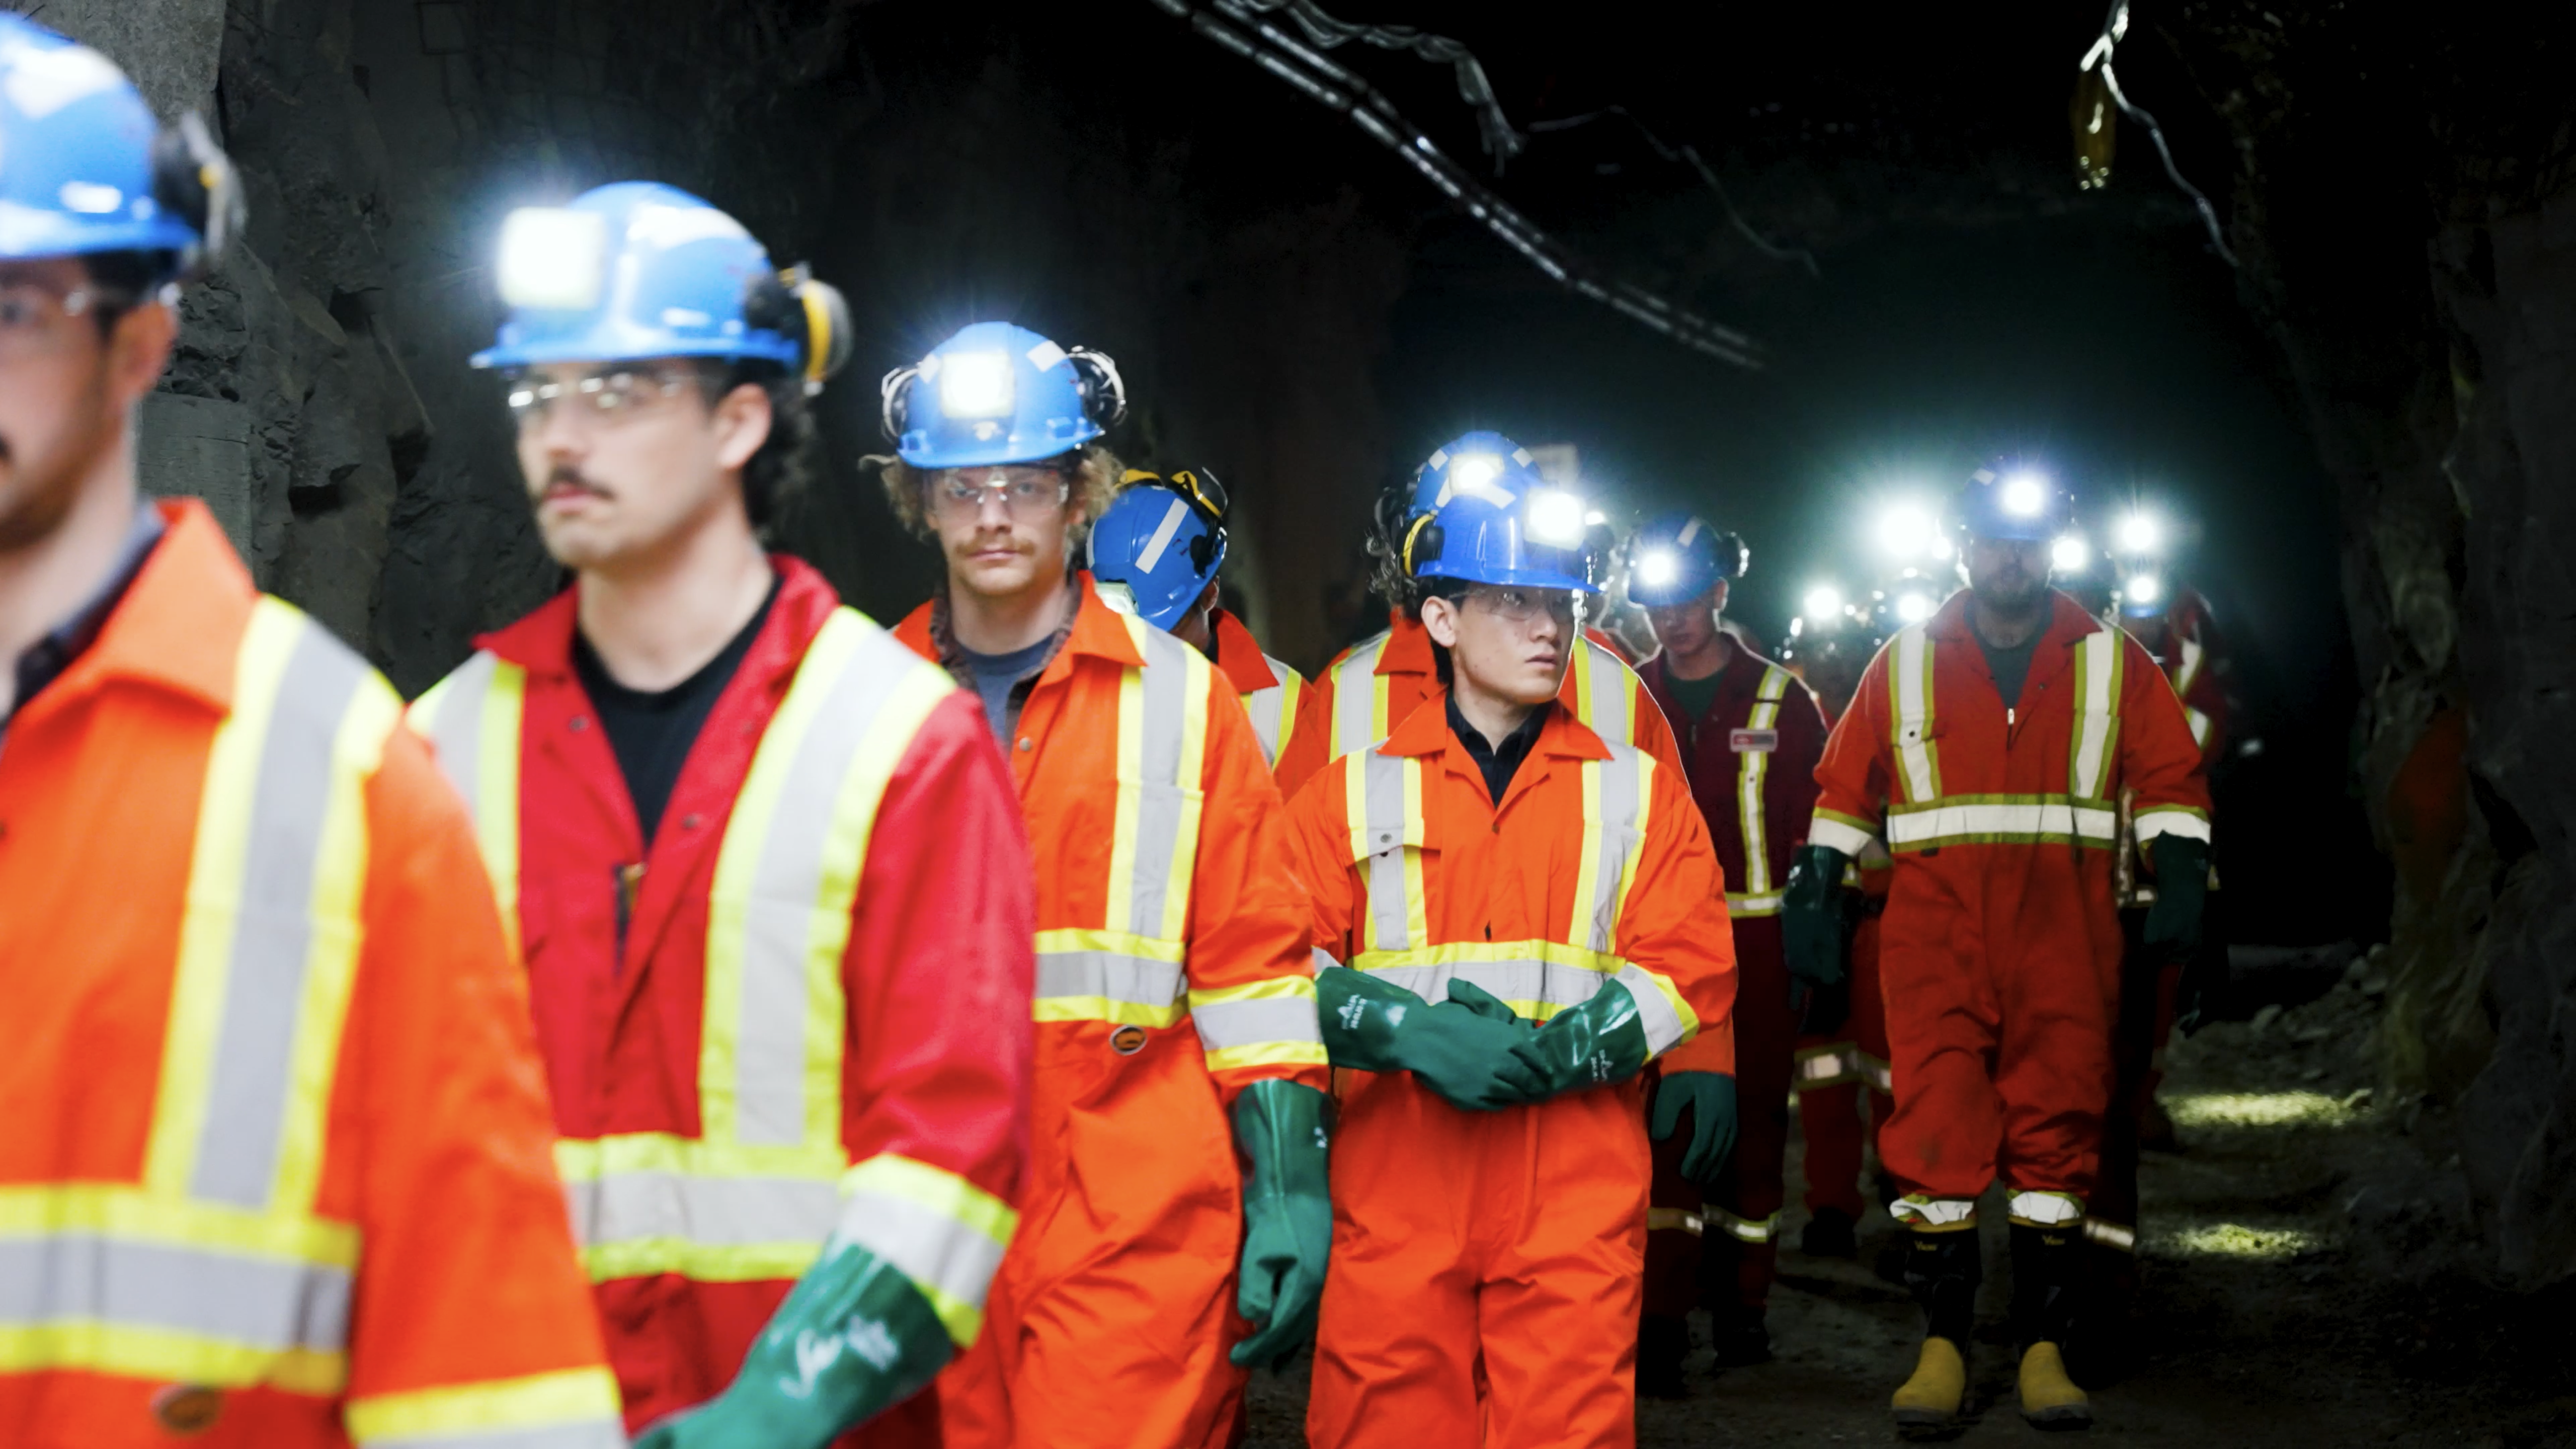 Line up of Ontario Mining workers in PPE